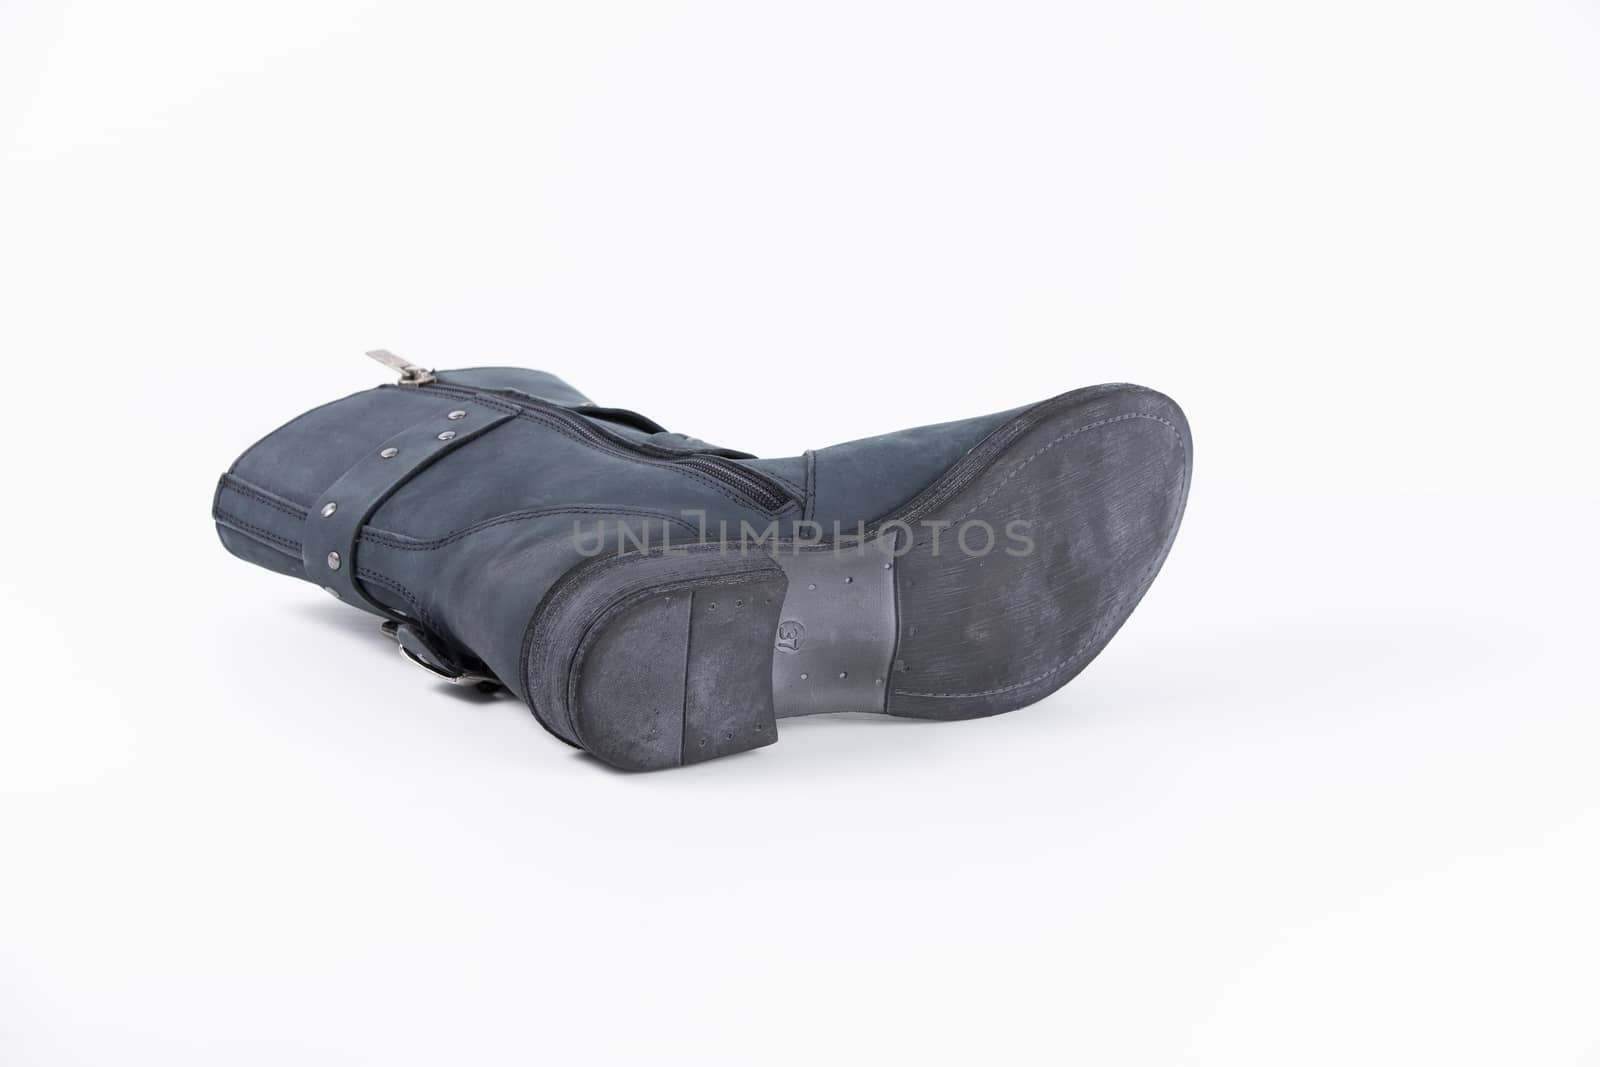 Female blue leather boots, isolated product.